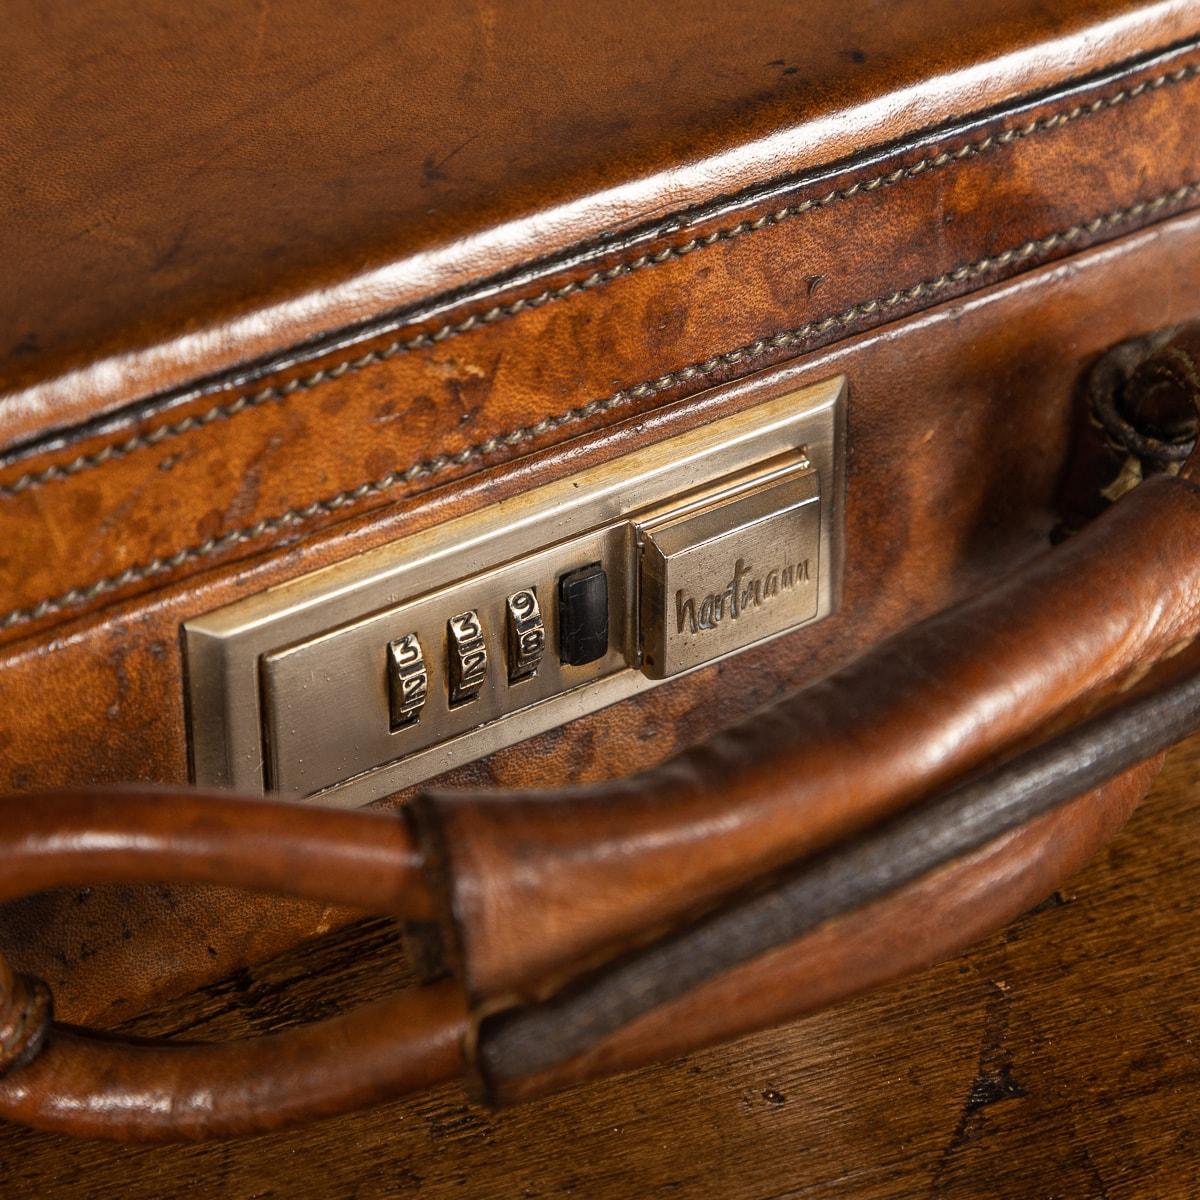 20th Century American Leather Briefcase by Hartmann, circa 1920 For Sale 2